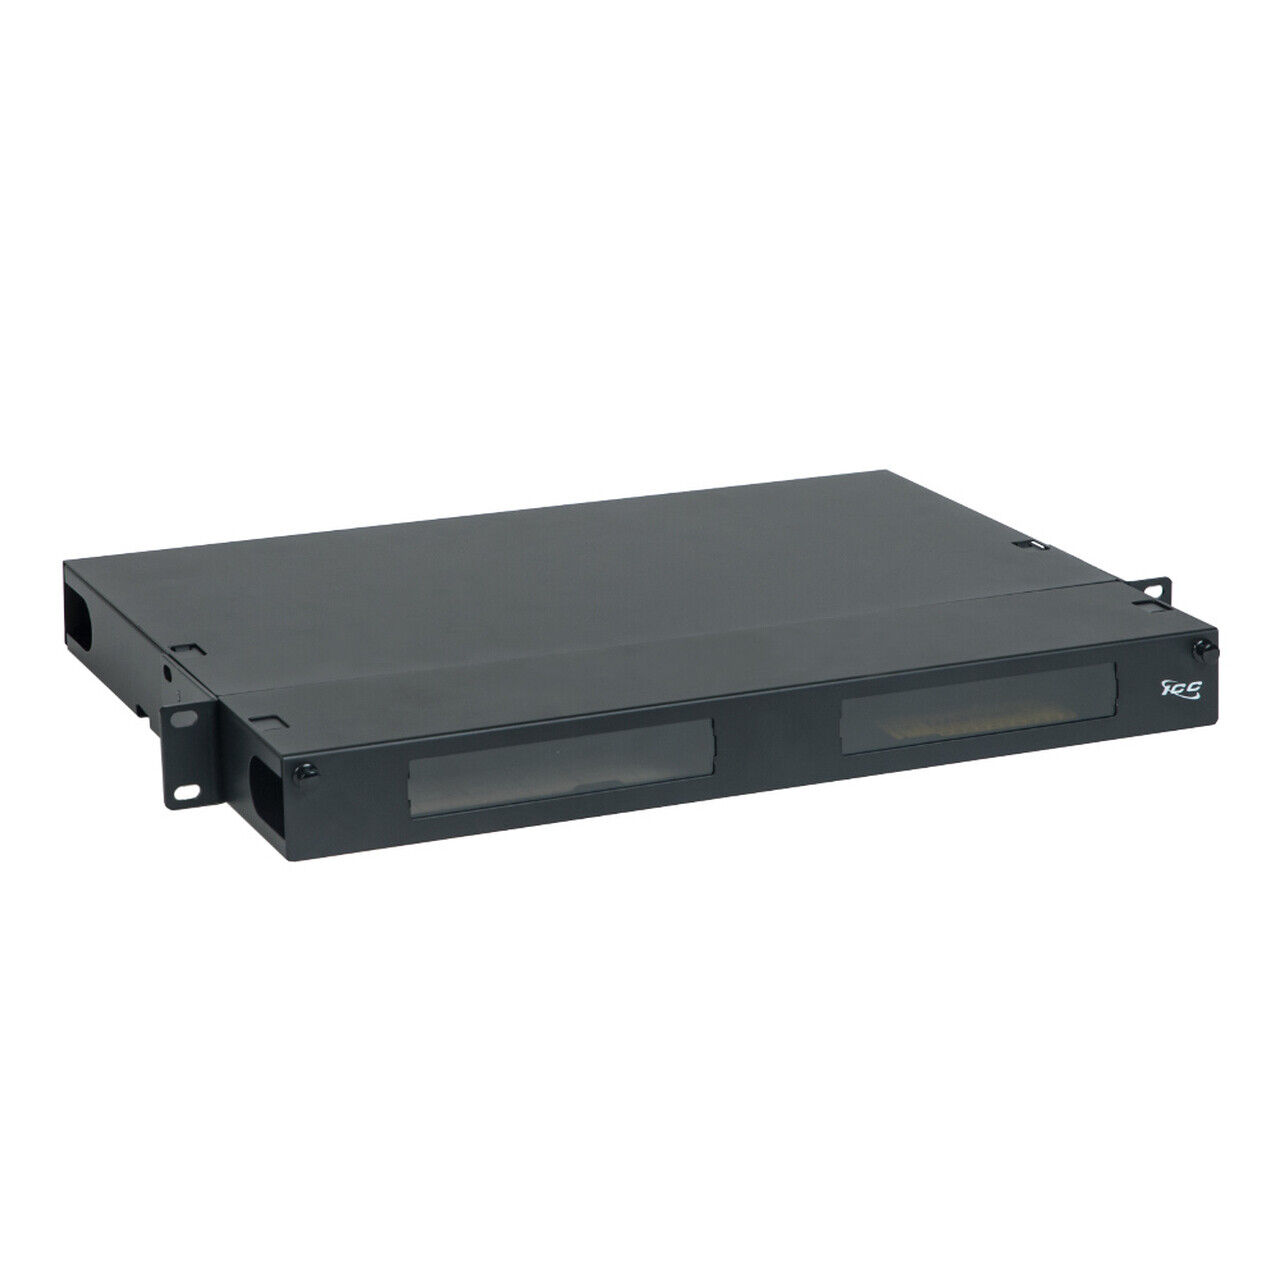 Classic 1 RMS Fiber Optic Rack Mount Enclosure with 3 Slots for LGX Compatible